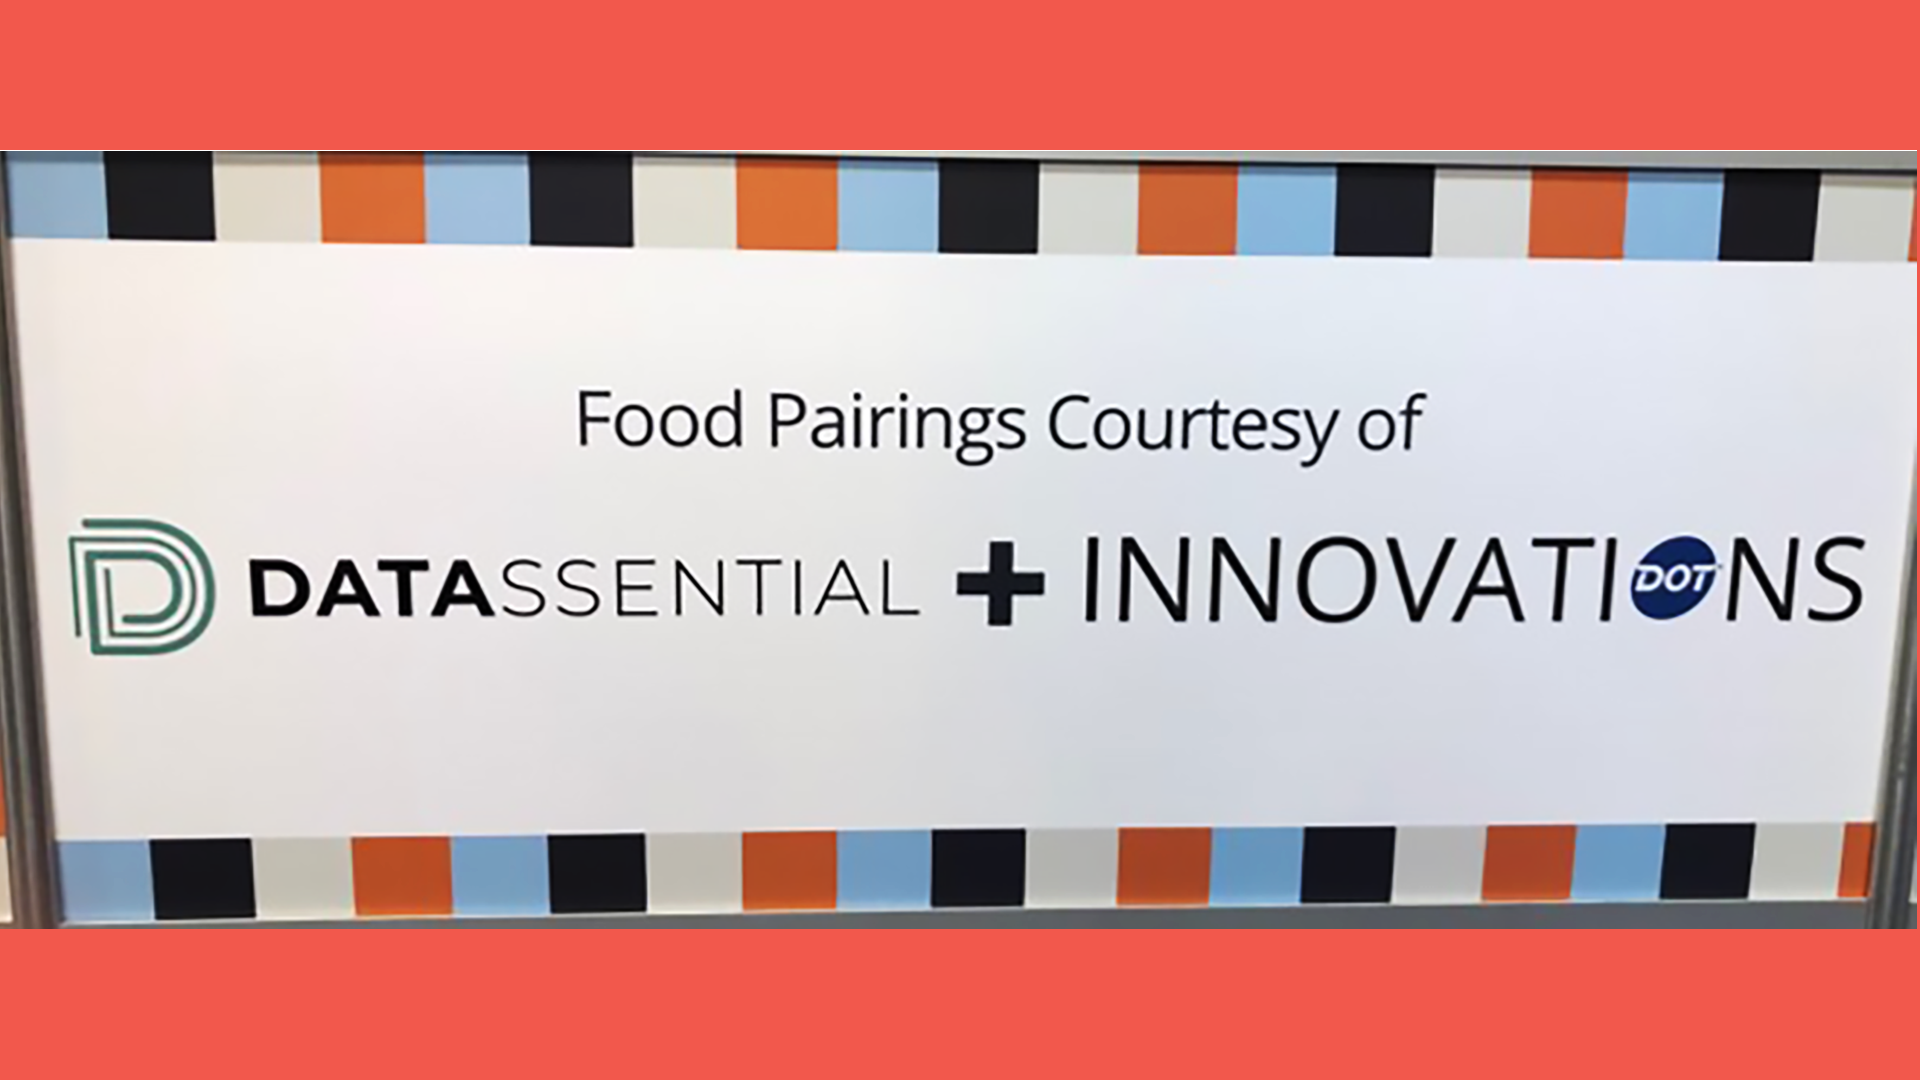 Datassential's Jack Li presents data-driven insights into forces shaping foodservice at Dot Foods' Innovations event. Explore food and beverage trends and virtually taste the food pairings featured at the Datassential & Dot Foods booth.